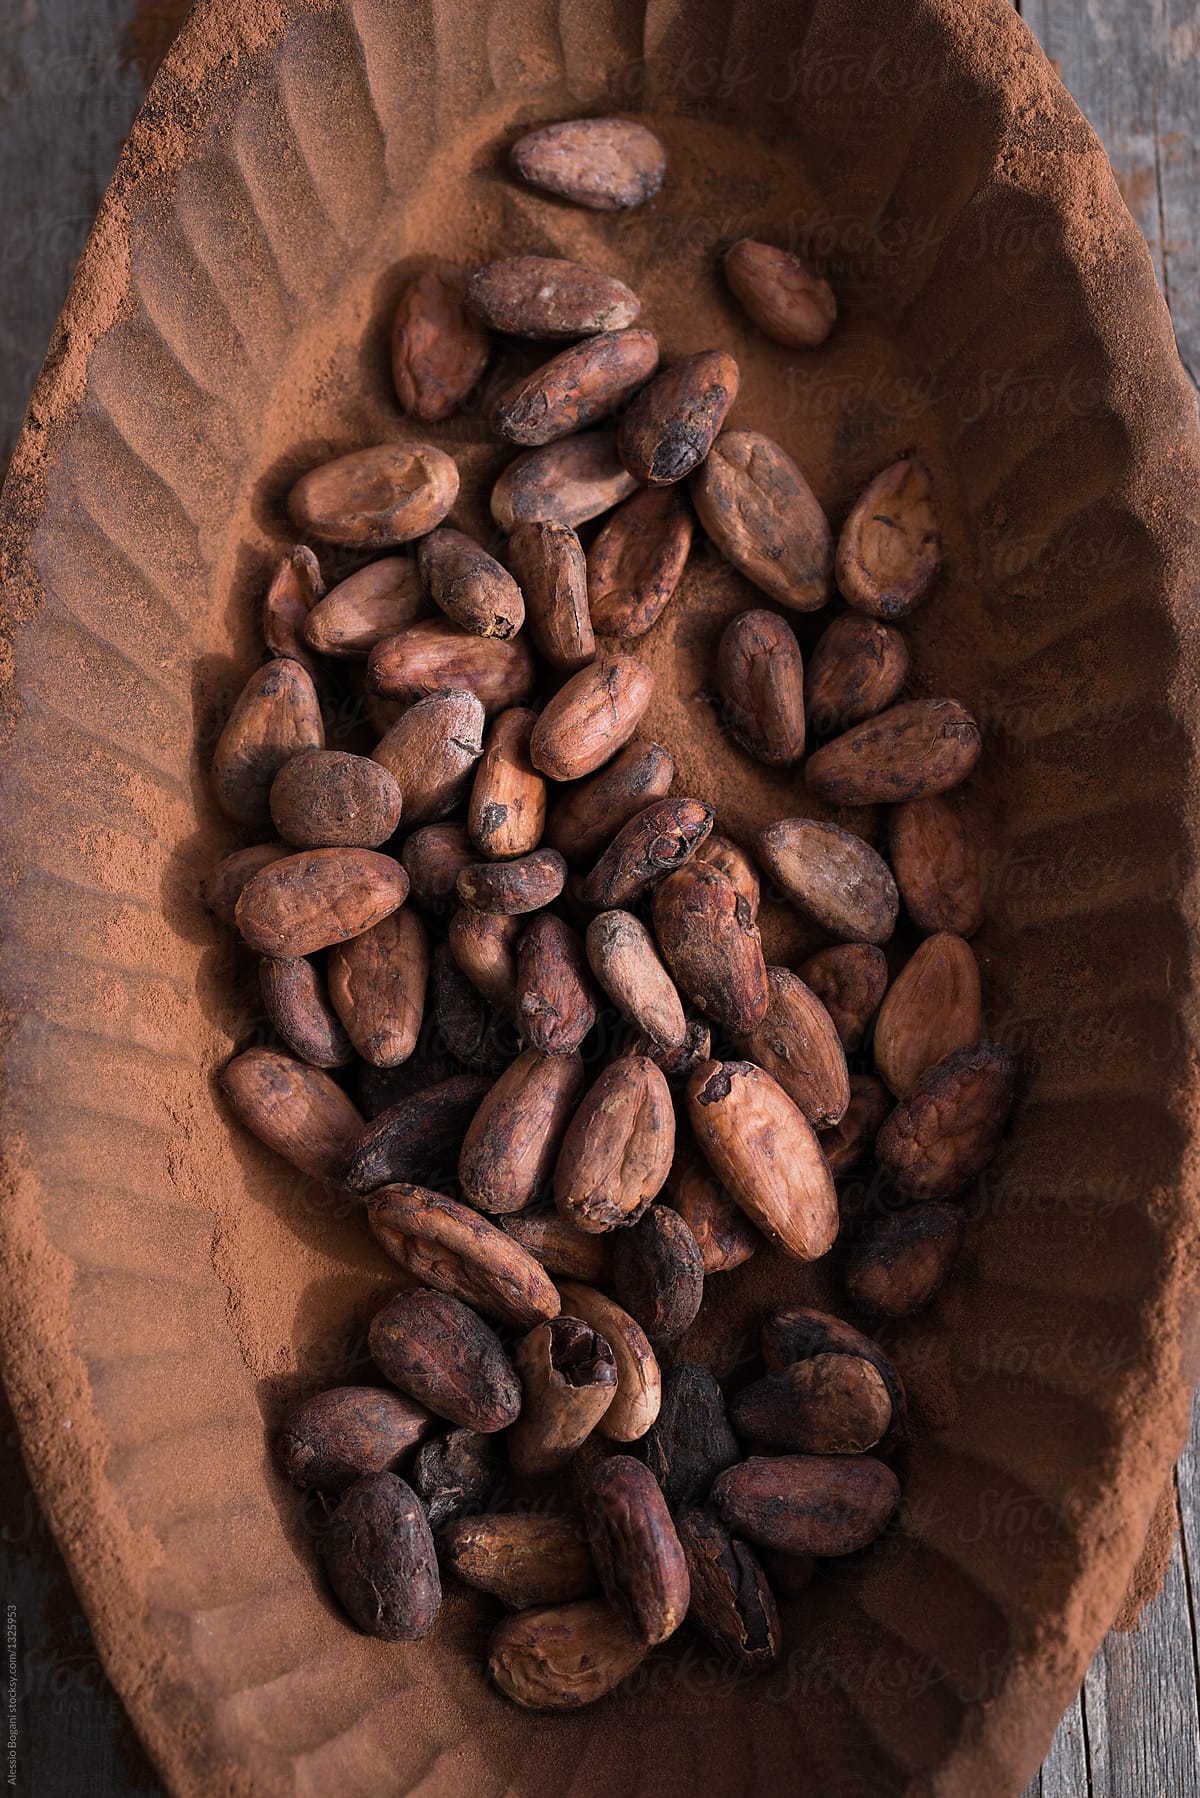 Cocoa beans from above